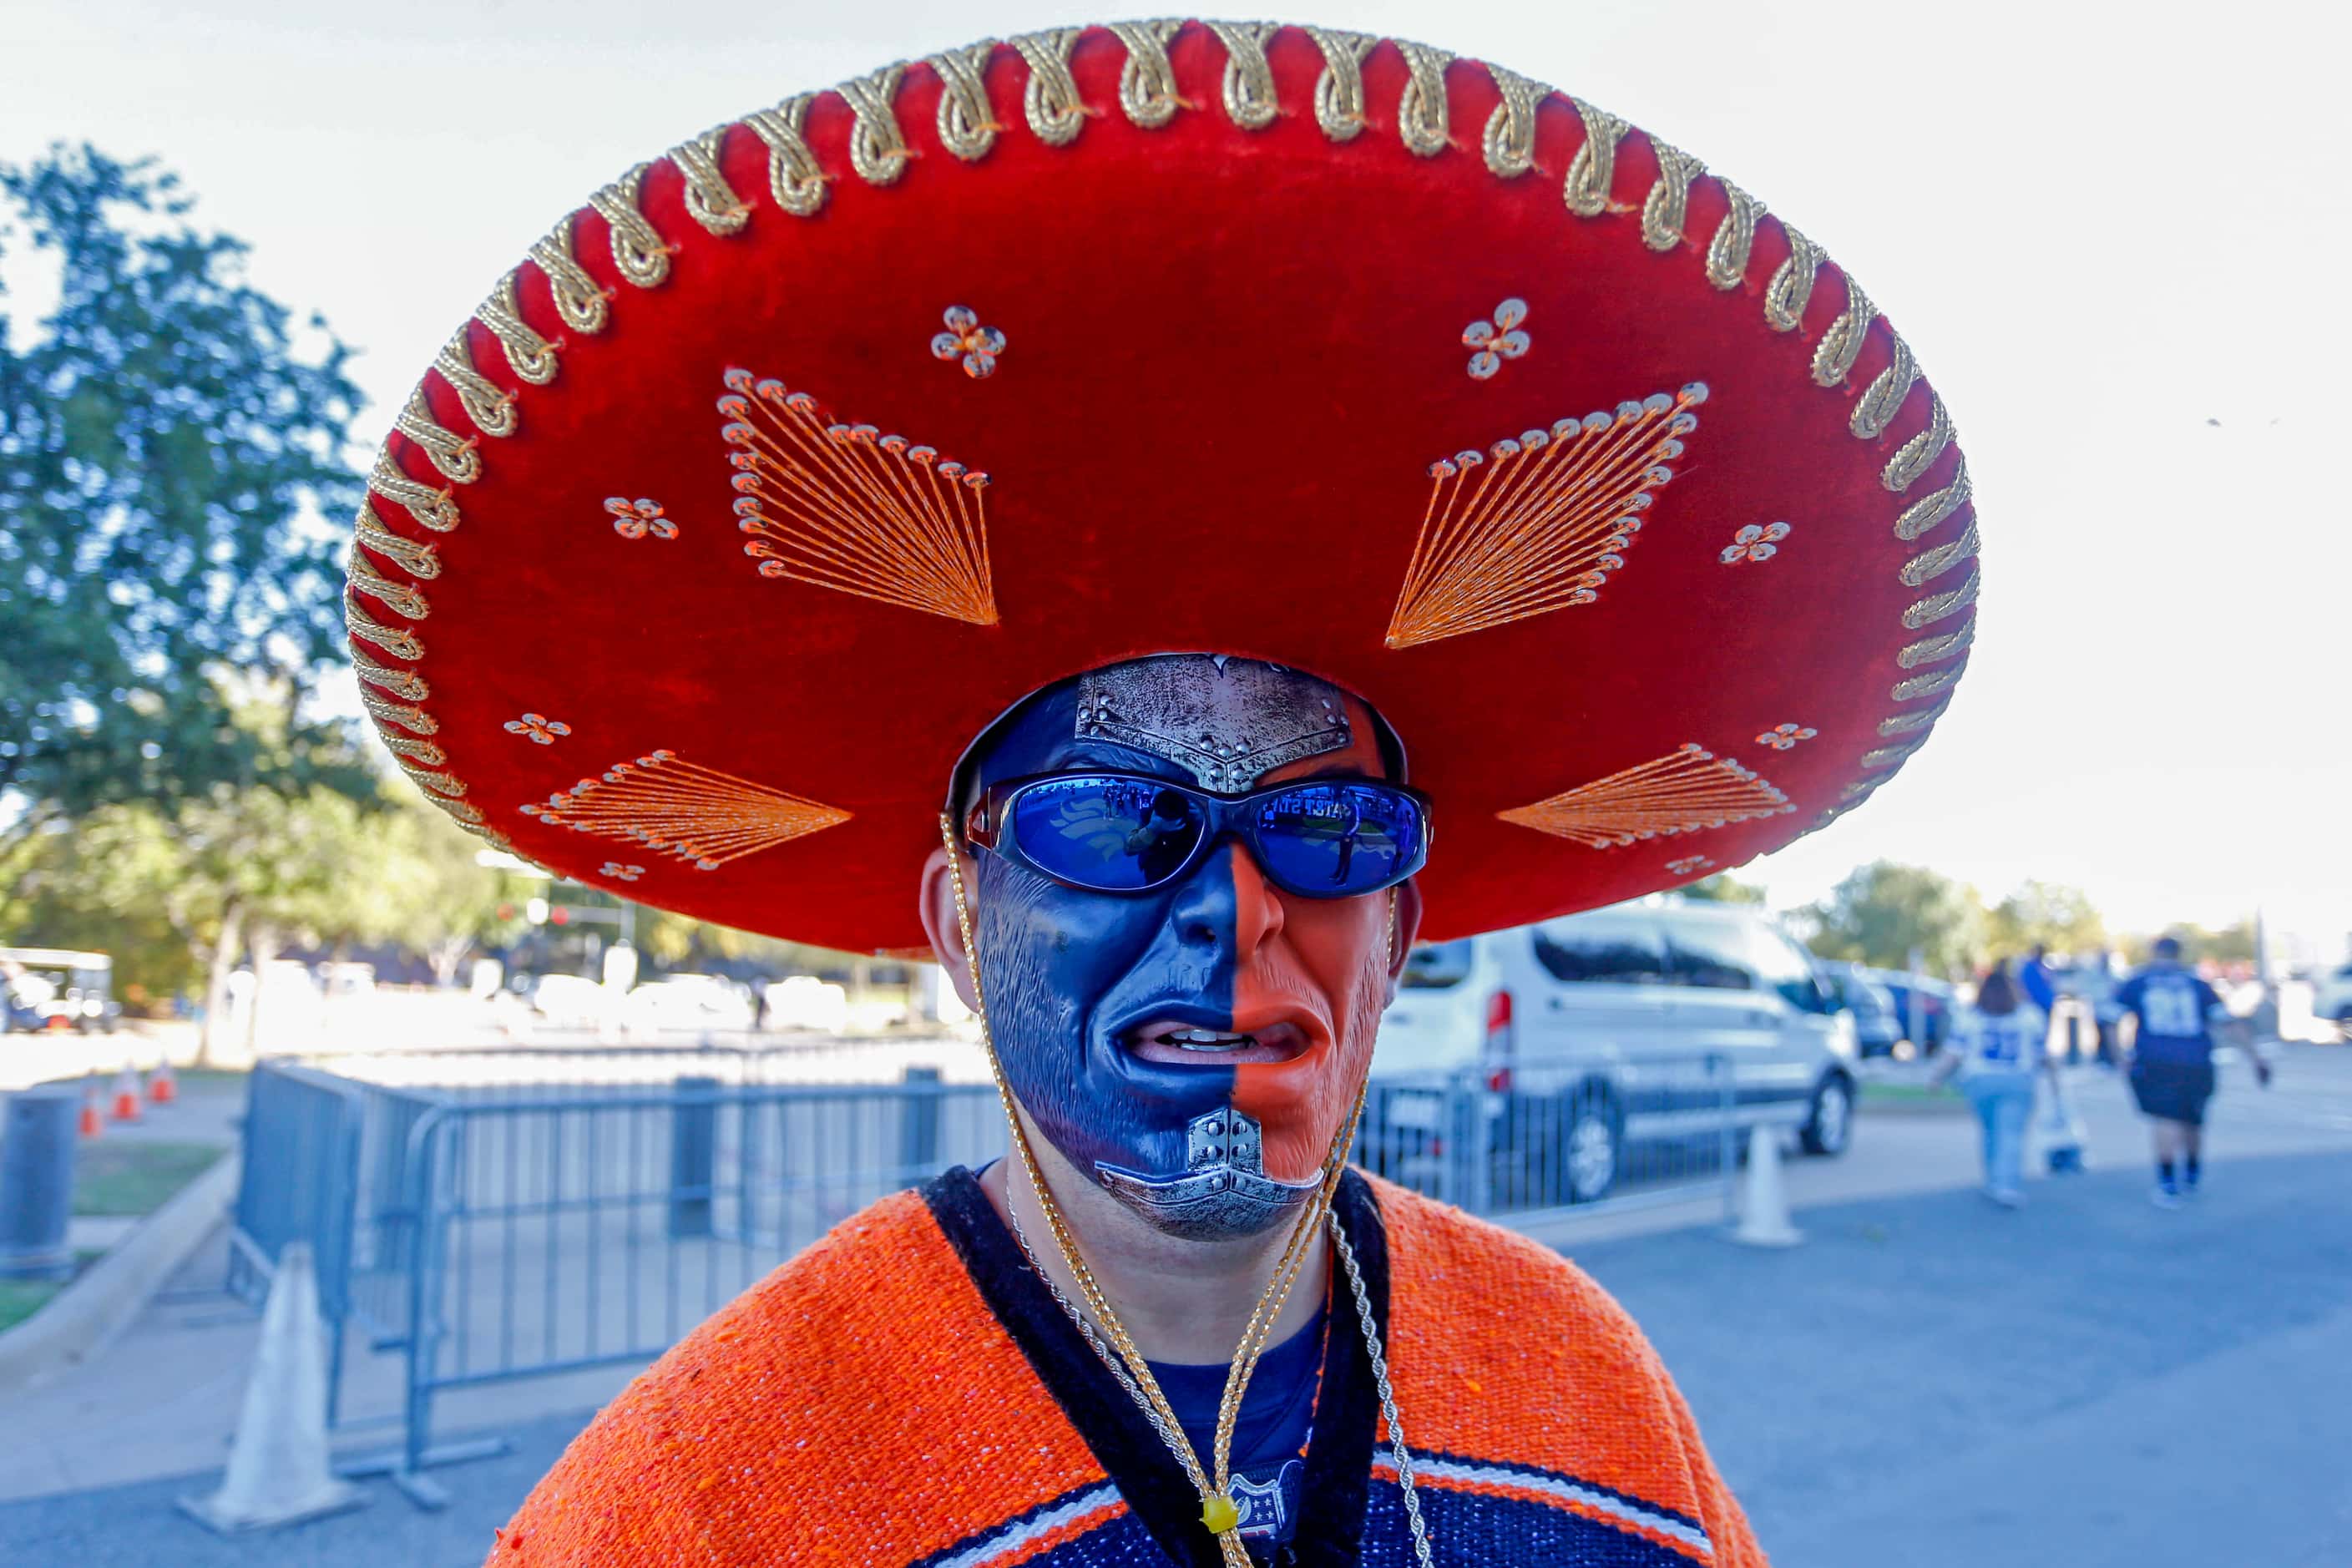 Denver Broncos fan Larry Saiz, of Pocatello, ID, sports a mask and bright orange outfit on...